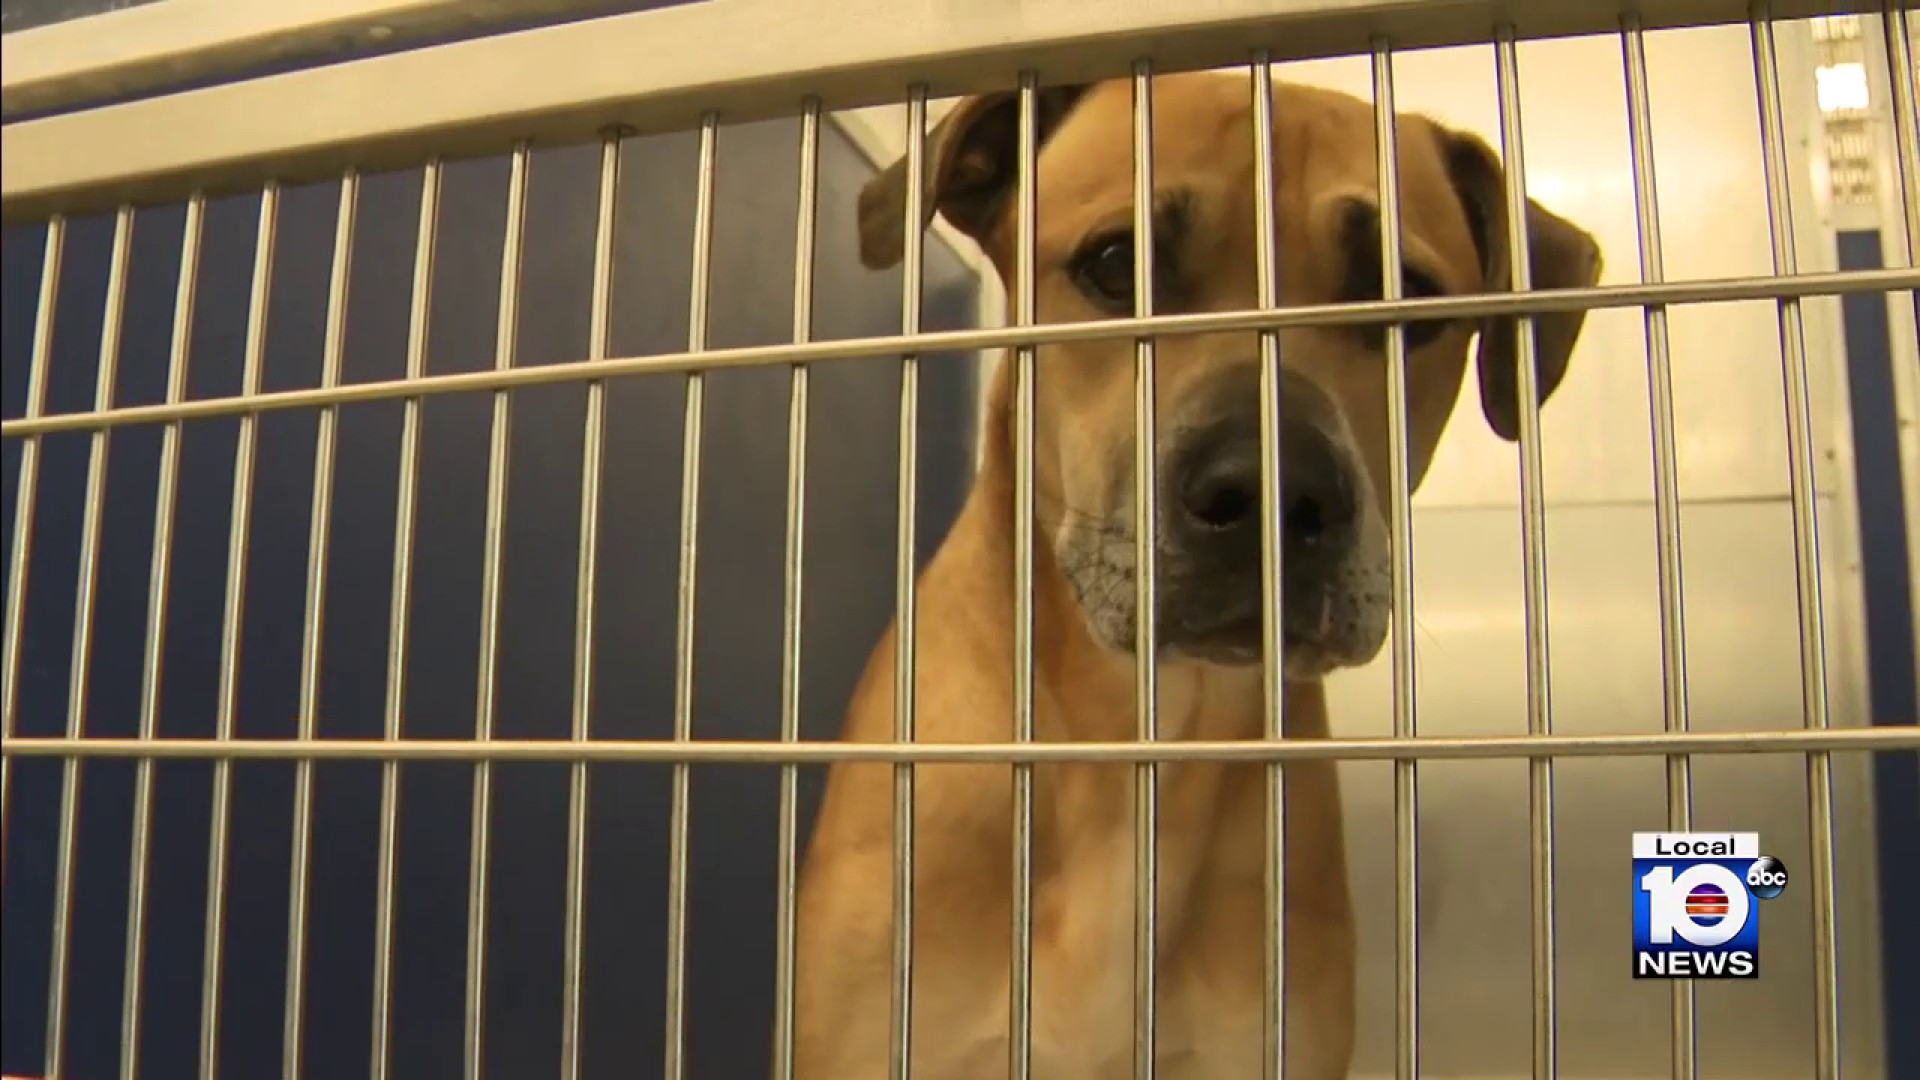 Animal shelter's plea: 'If you can think about adopting come in now'